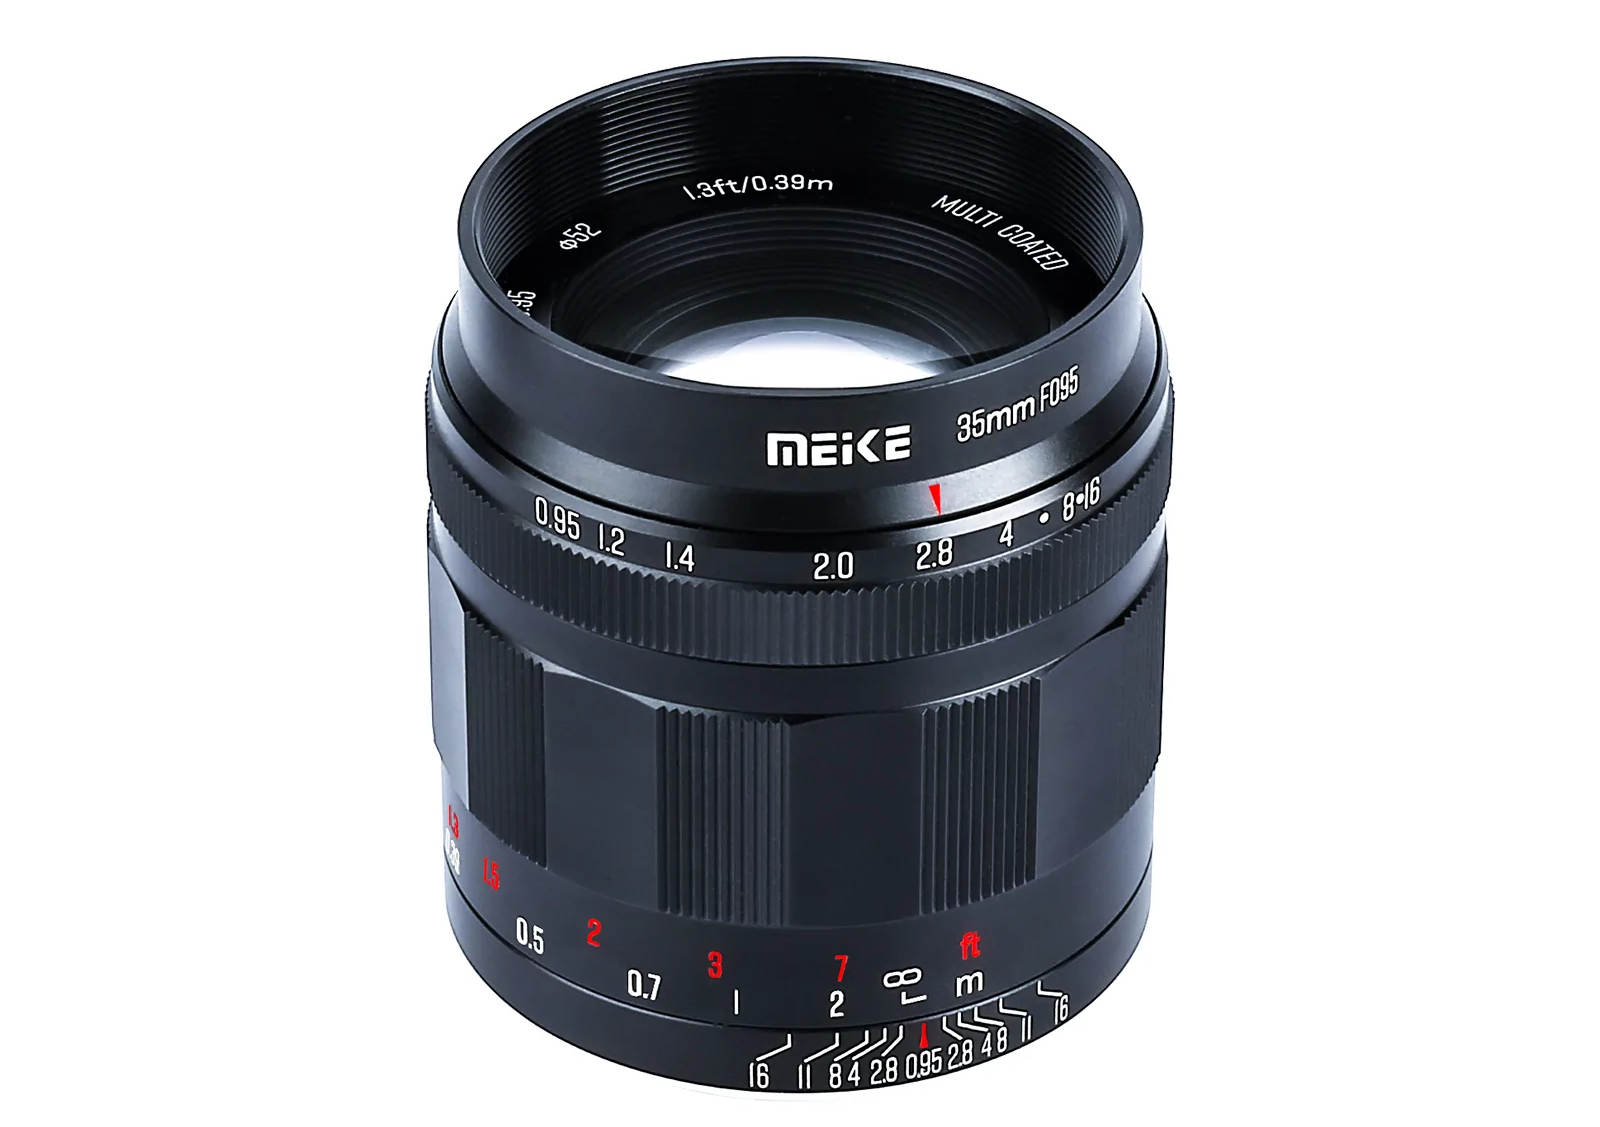 Meike launches affordable 35mm F0.95 with APS-C image circle lens 